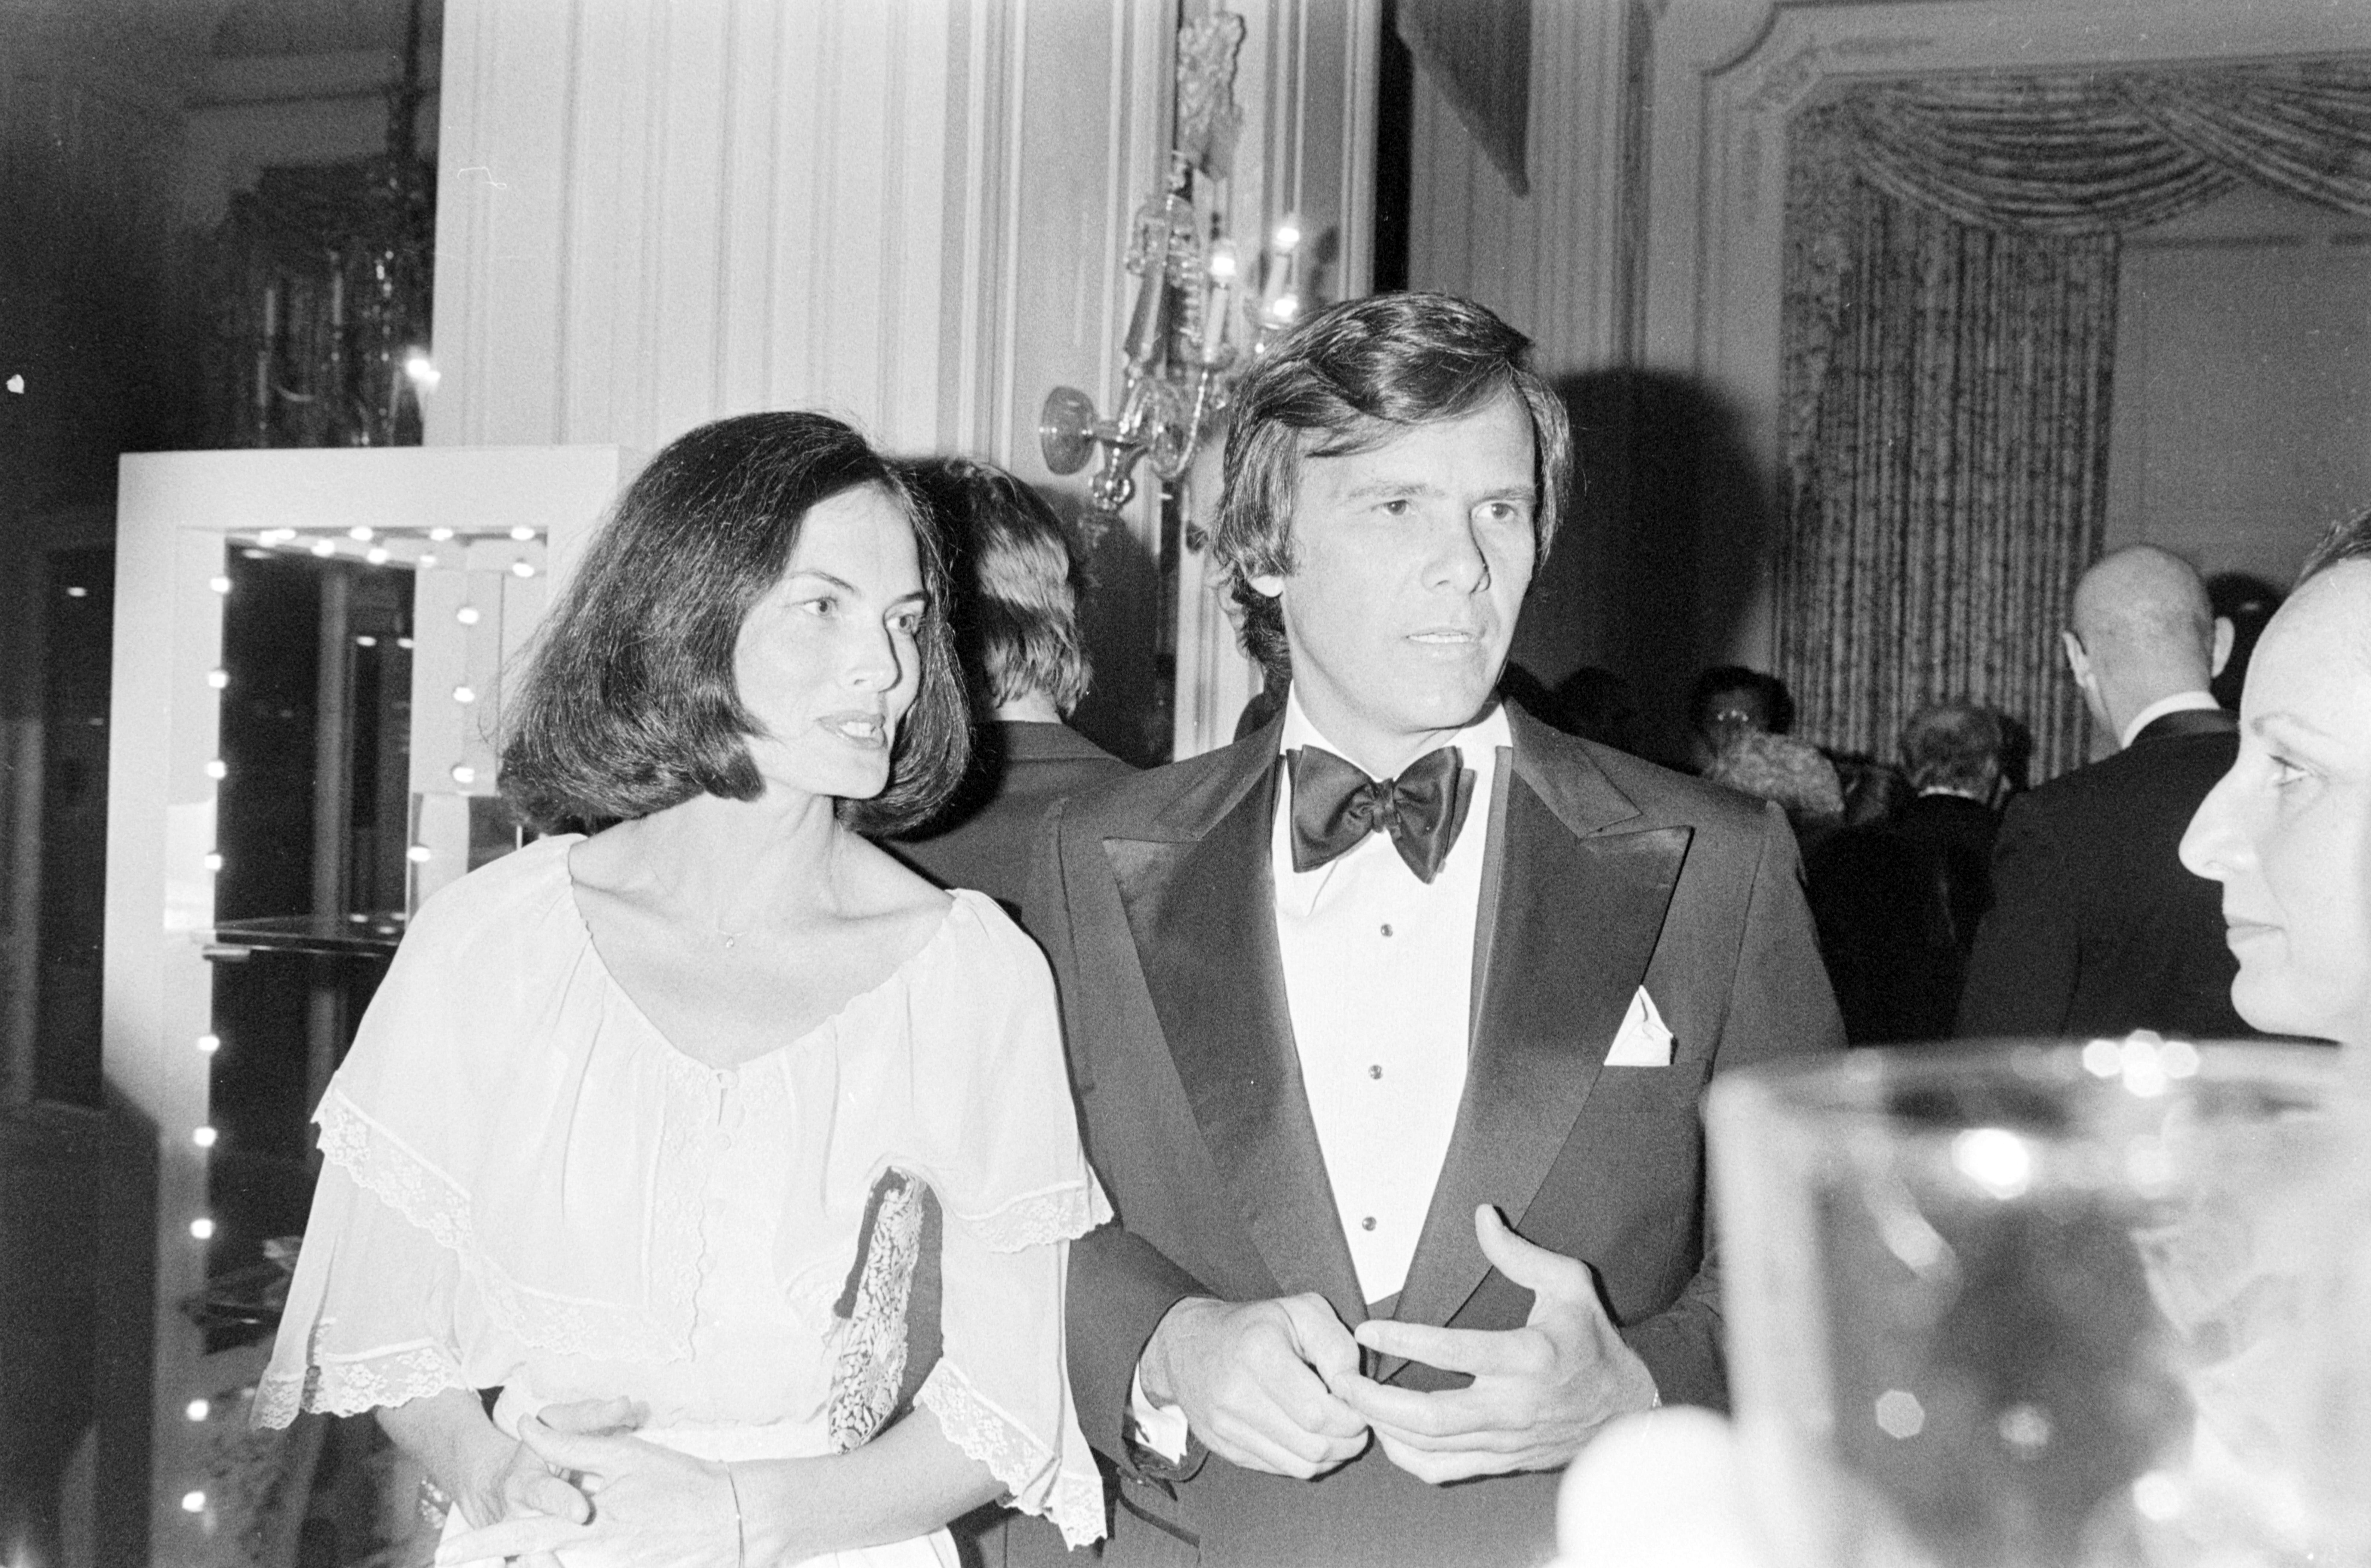 Meredith Brokaw and Tom Brokaw at the Halston Benefit in New York City on March 16, 1977 | Source: Getty Images